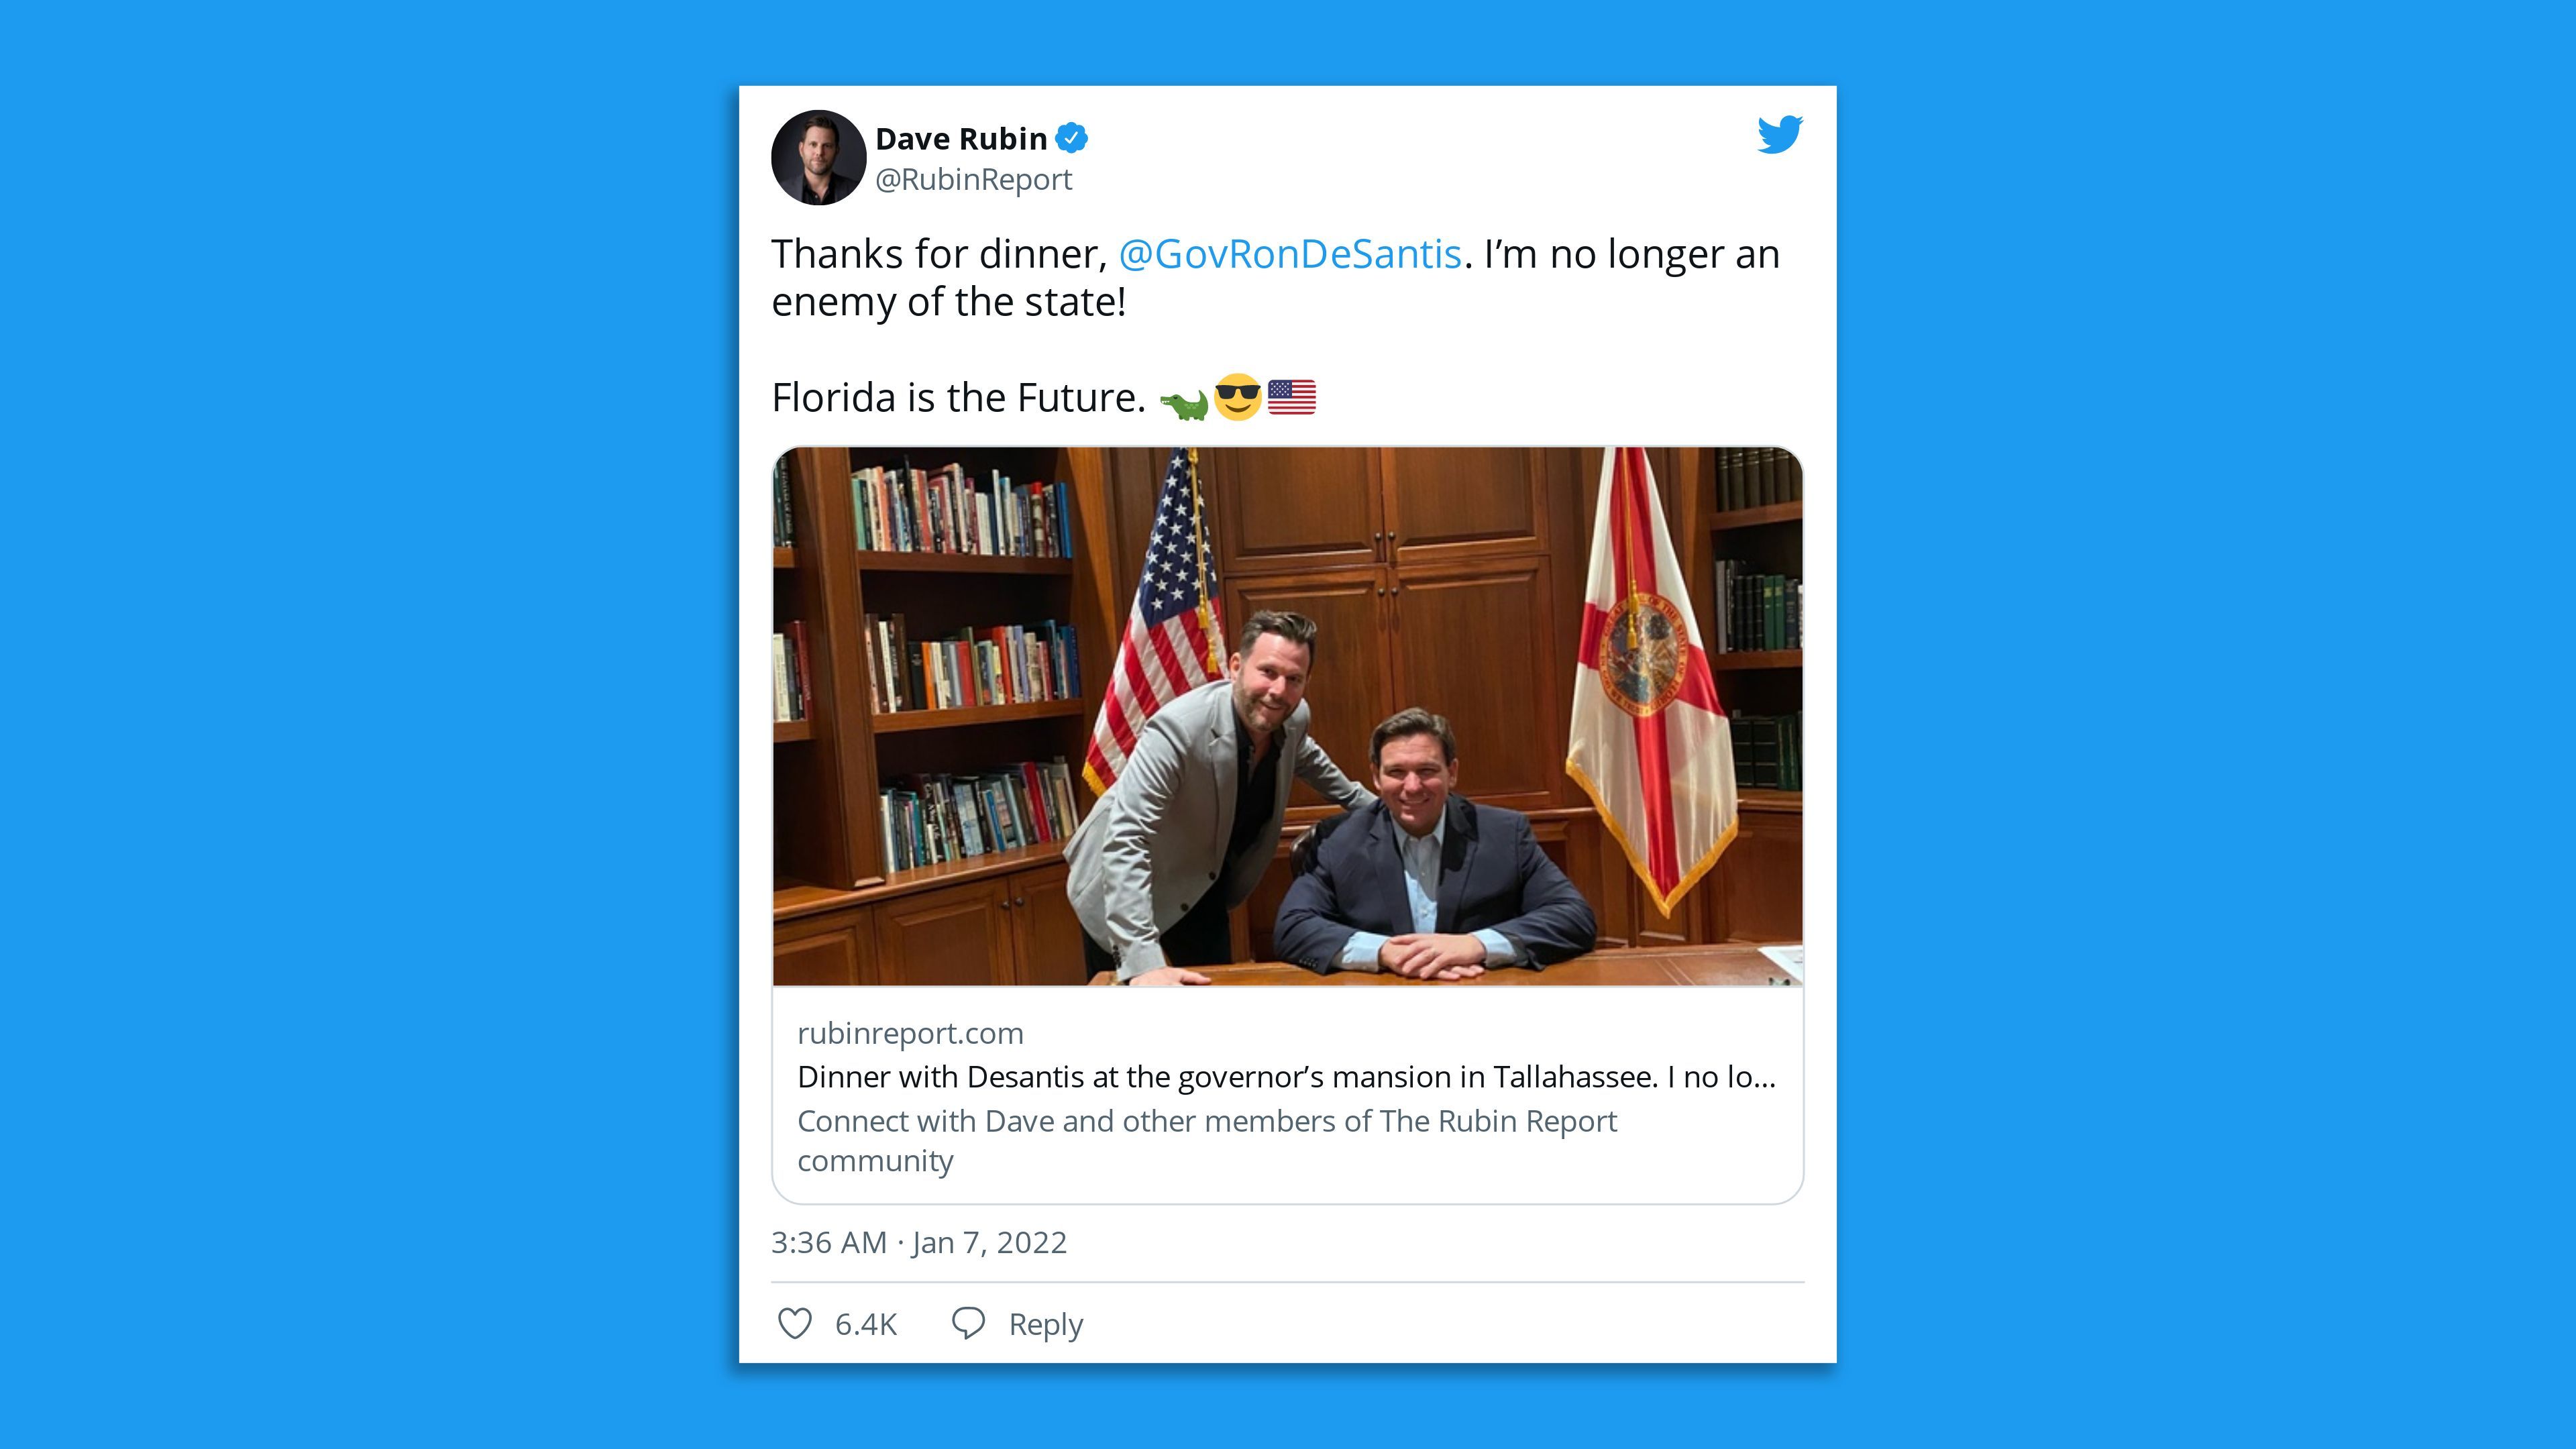 Dave Rubin tweeting about a good meeting with Ron DeSantis 